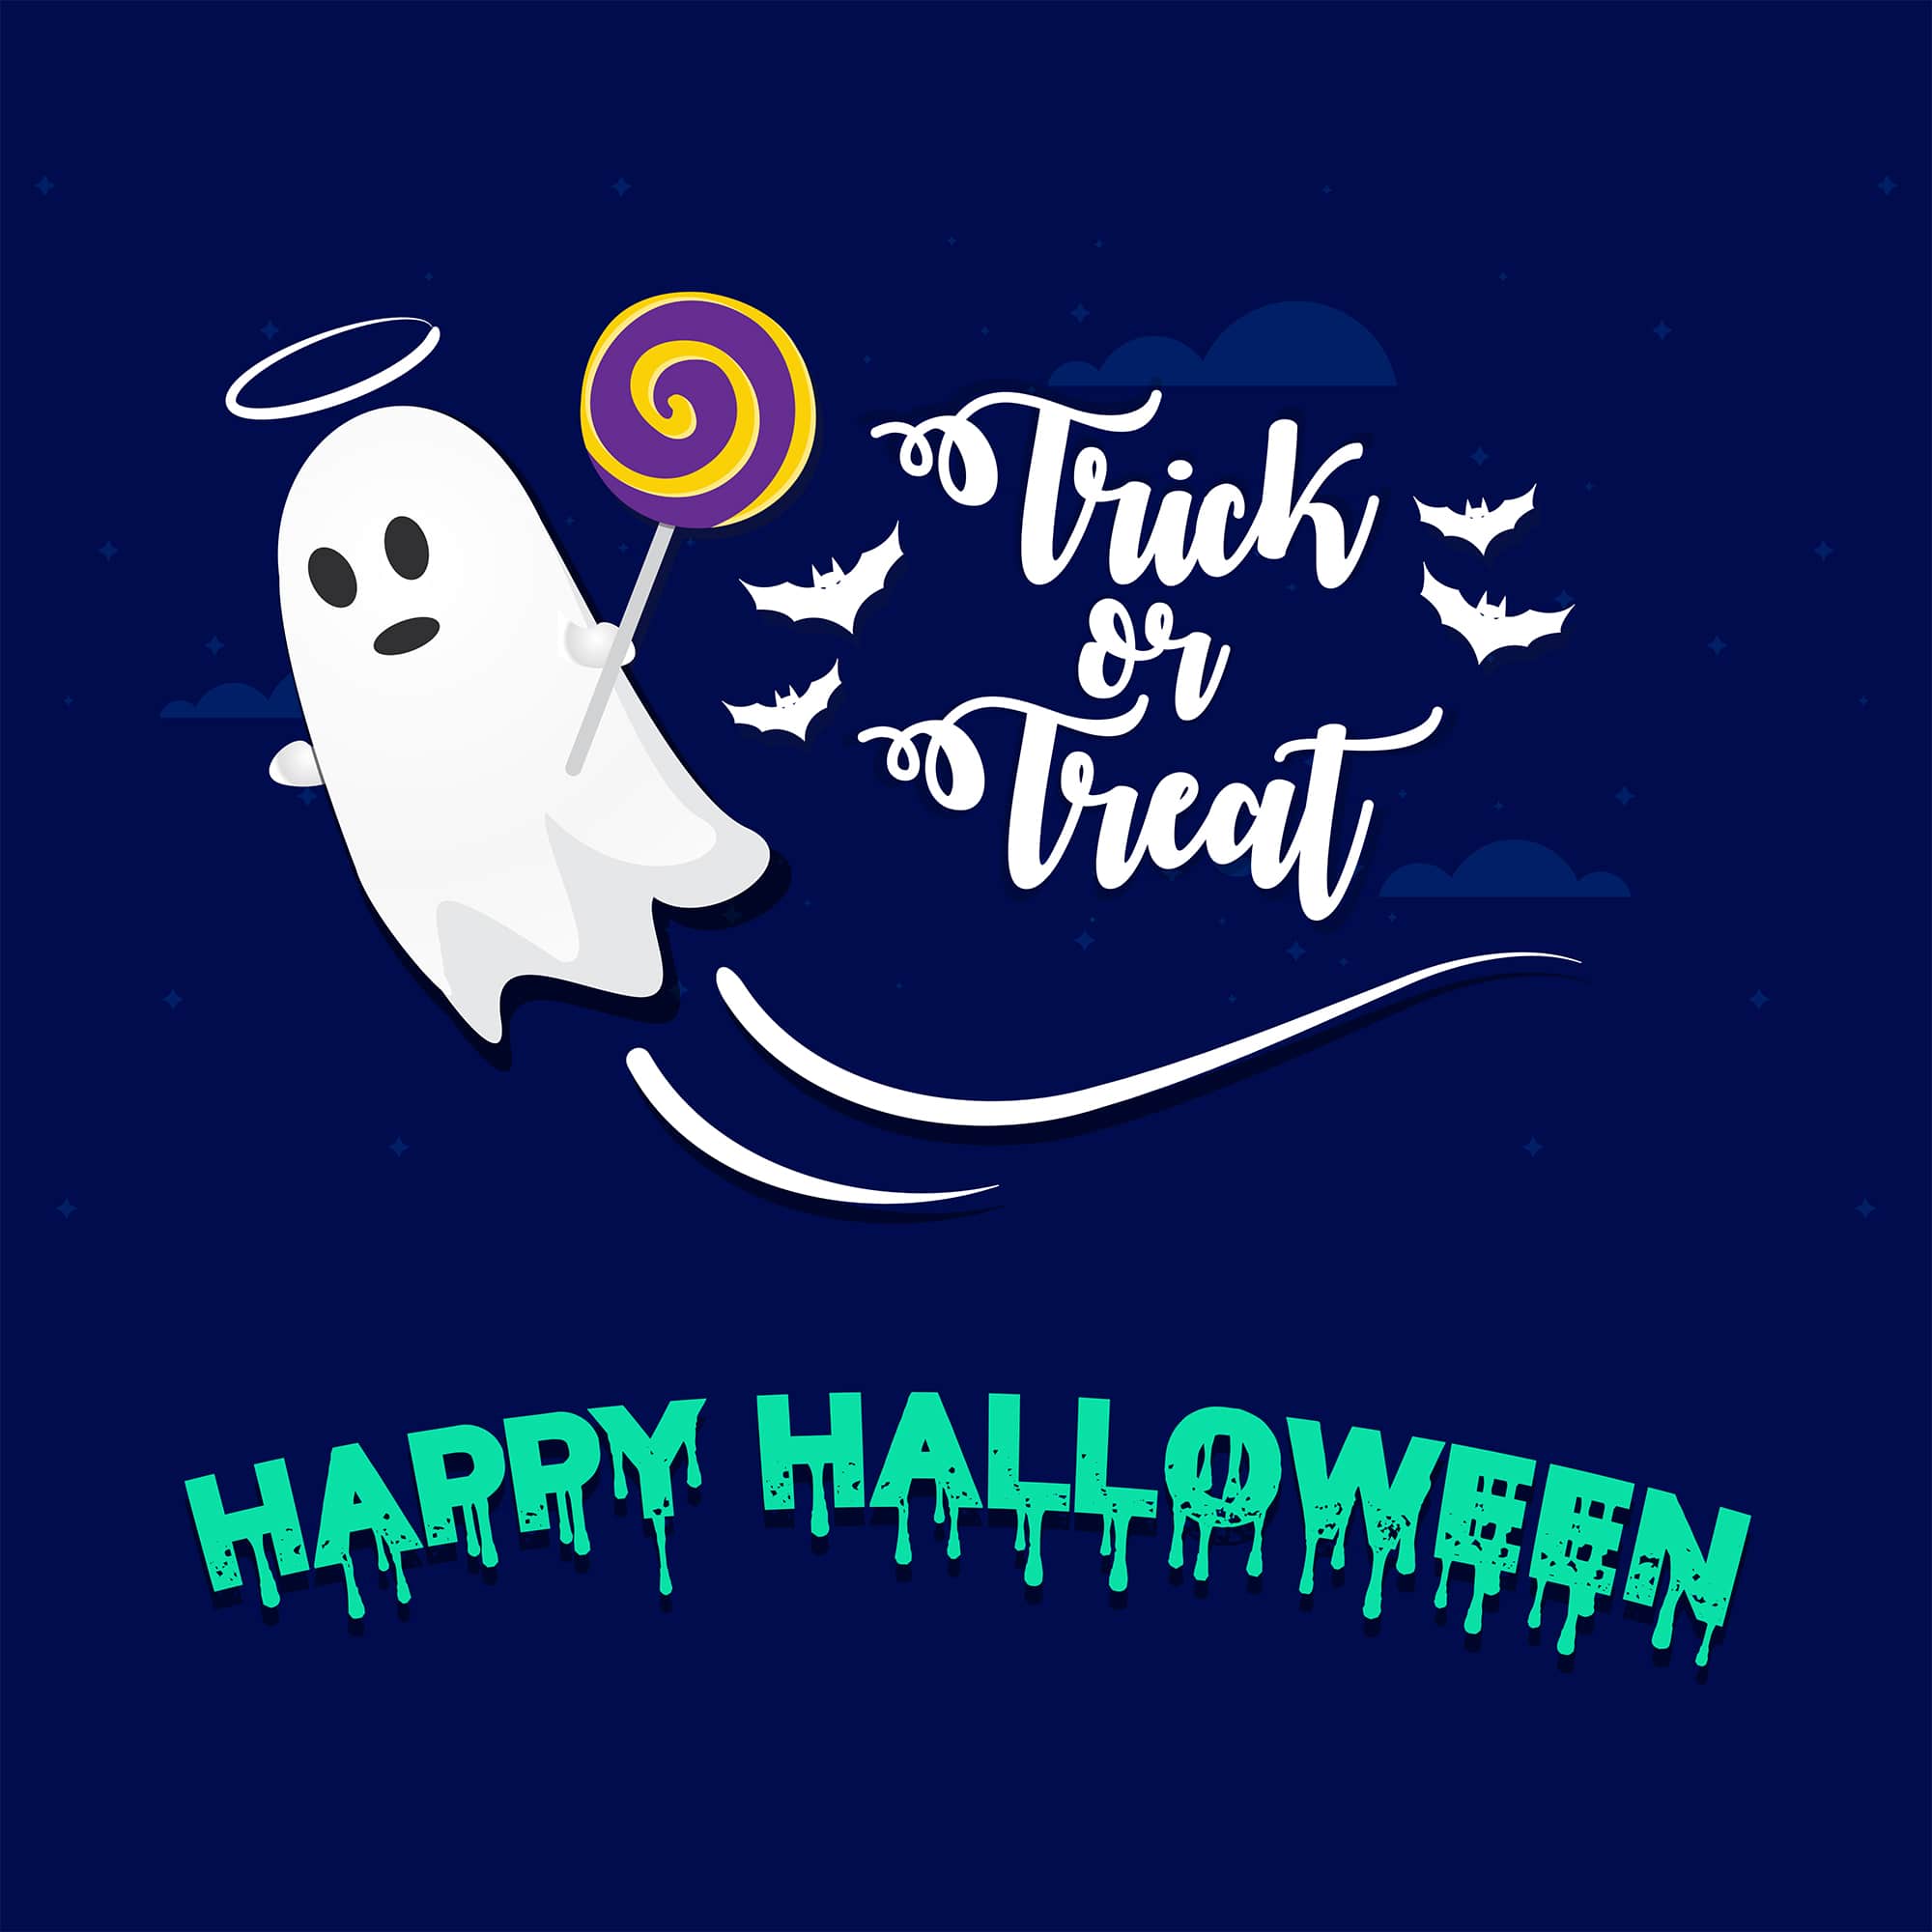 Trick or Treat vector template for Halloween with cute ghost illustration design